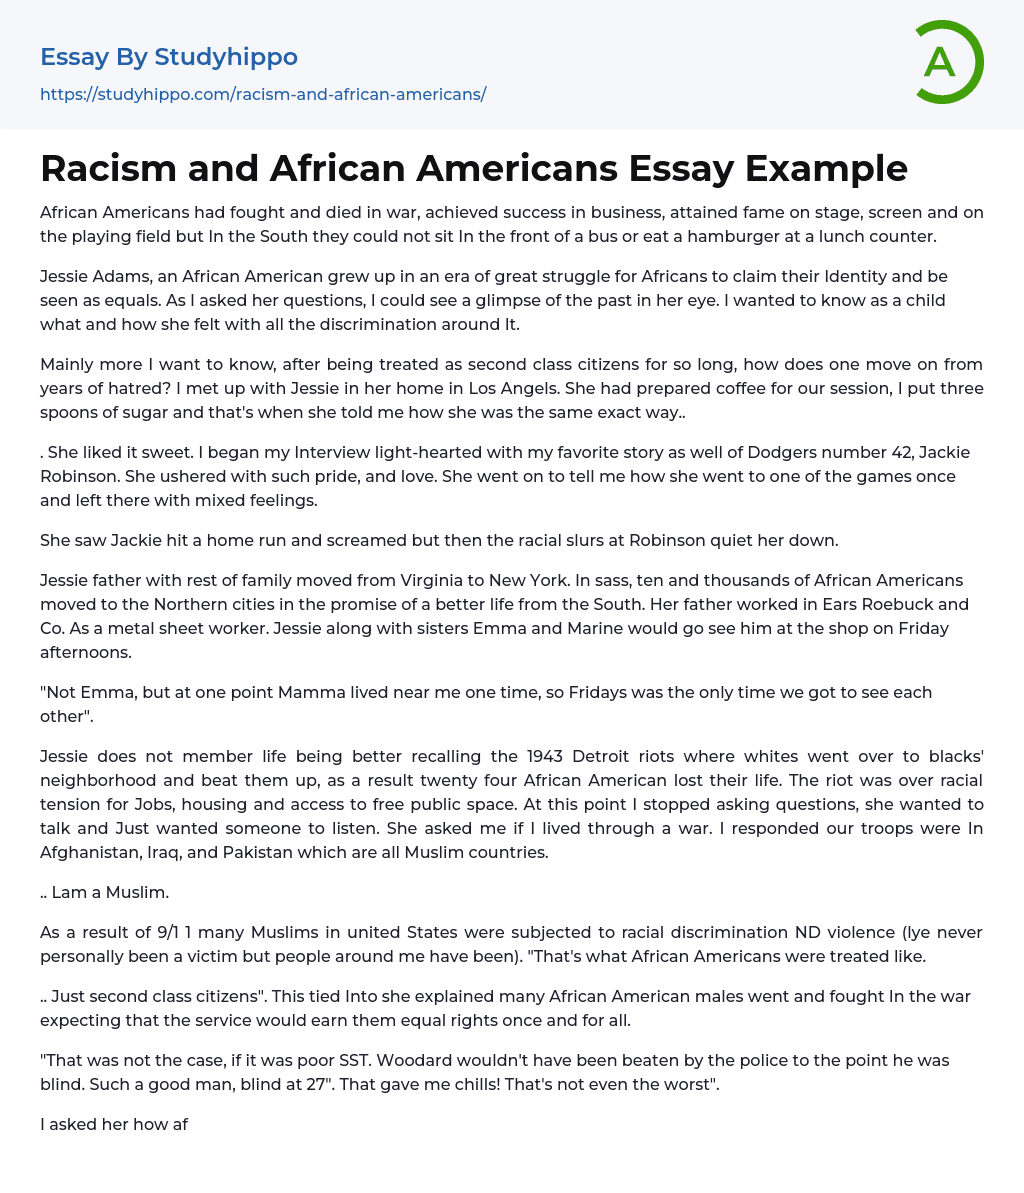 Racism and African Americans Essay Example